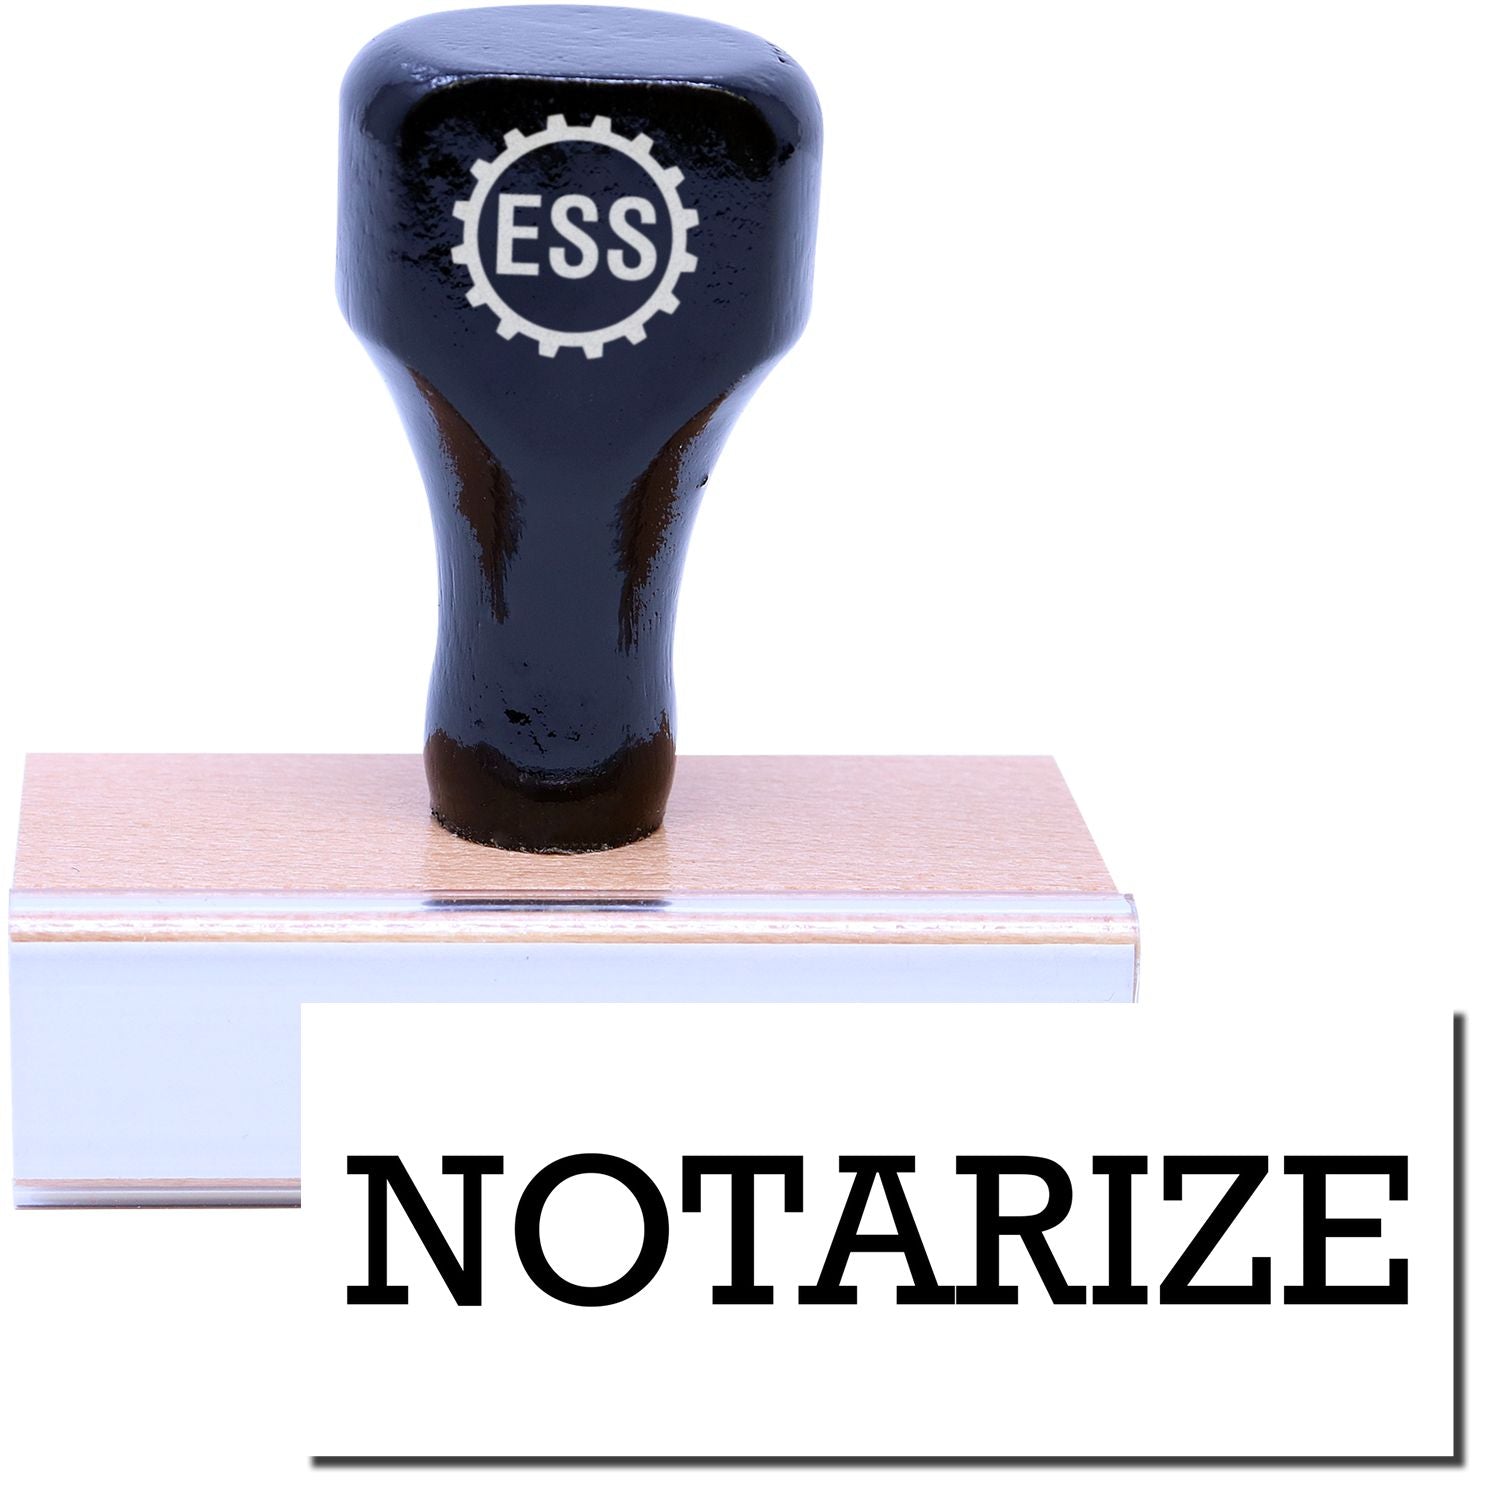 A stock office rubber stamp with a stamped image showing how the text "NOTARIZE" in a large font is displayed after stamping.